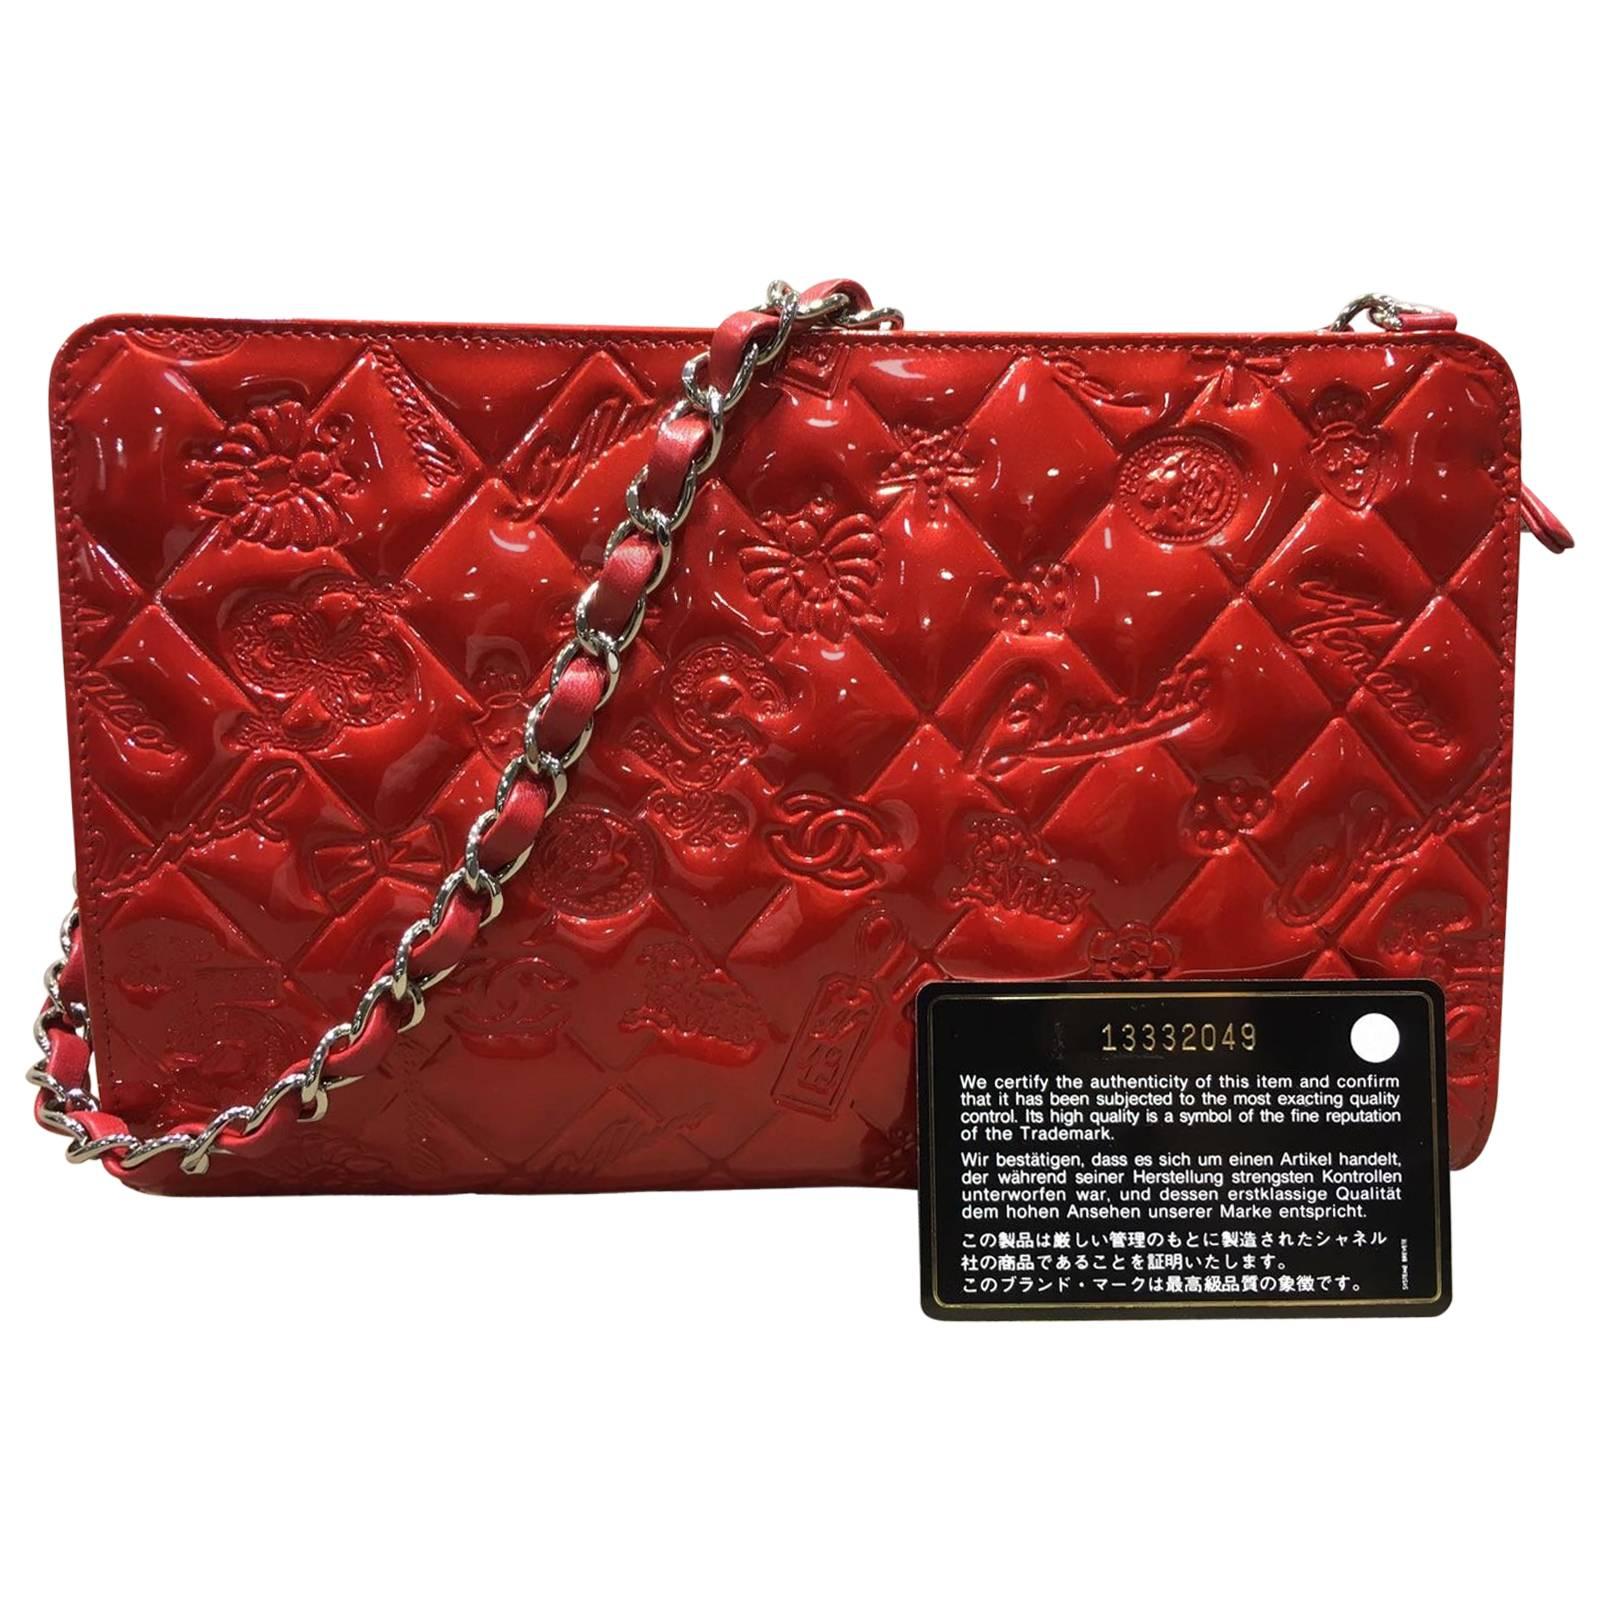 Chanel Red Patent and Lamb Icon motif Porch Bag